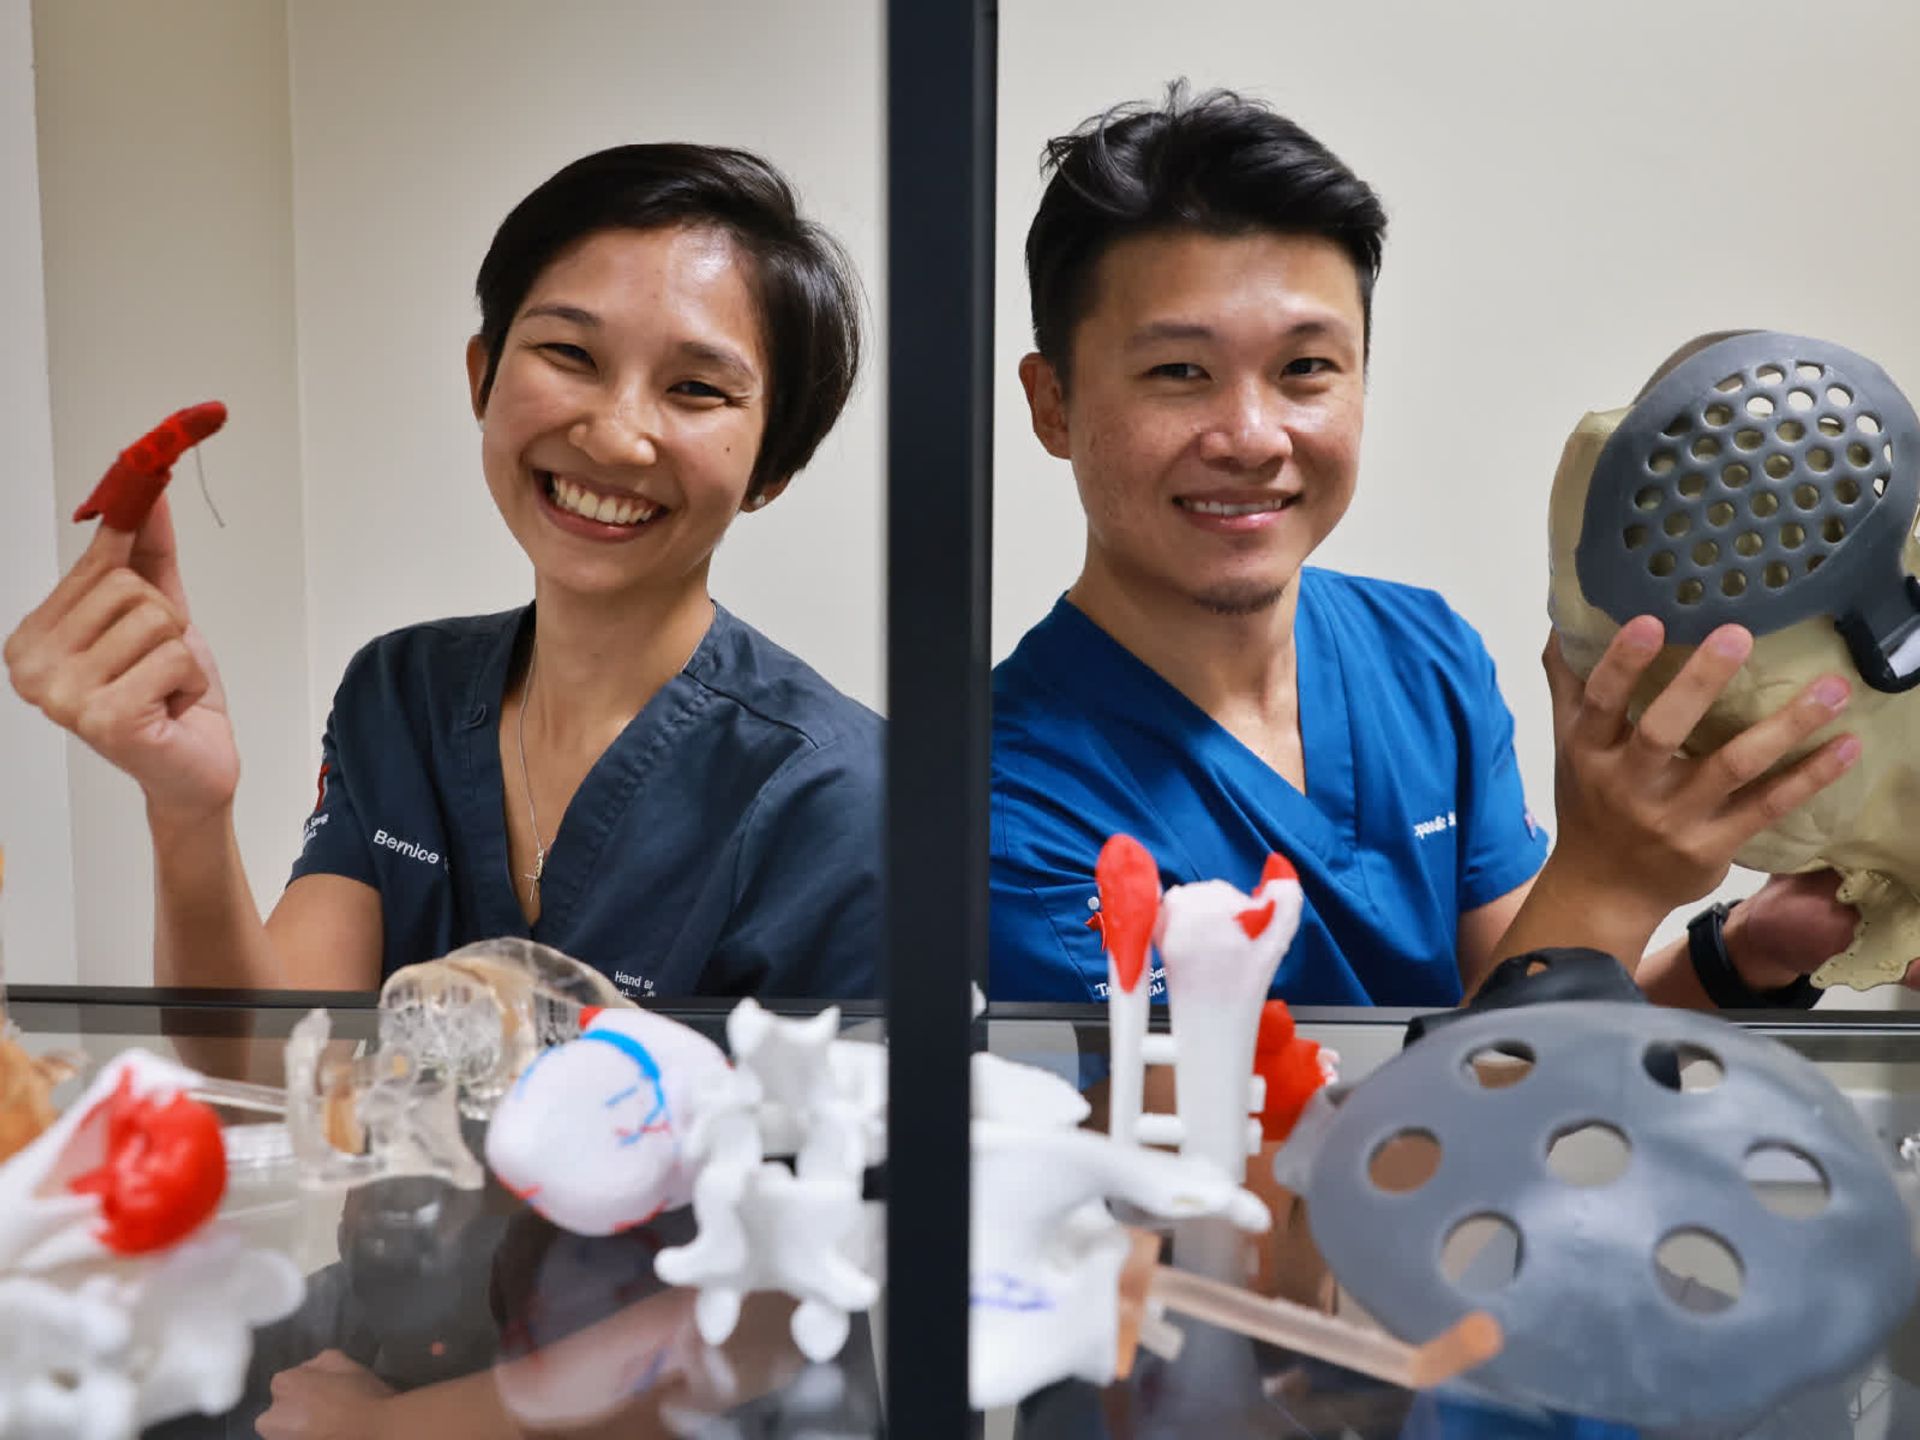 Tan Tock Seng Hospital's Dr Bernice Heng (left) with a 3D-printed finger prosthesis and Dr Michael Yam holding a cranial cap.